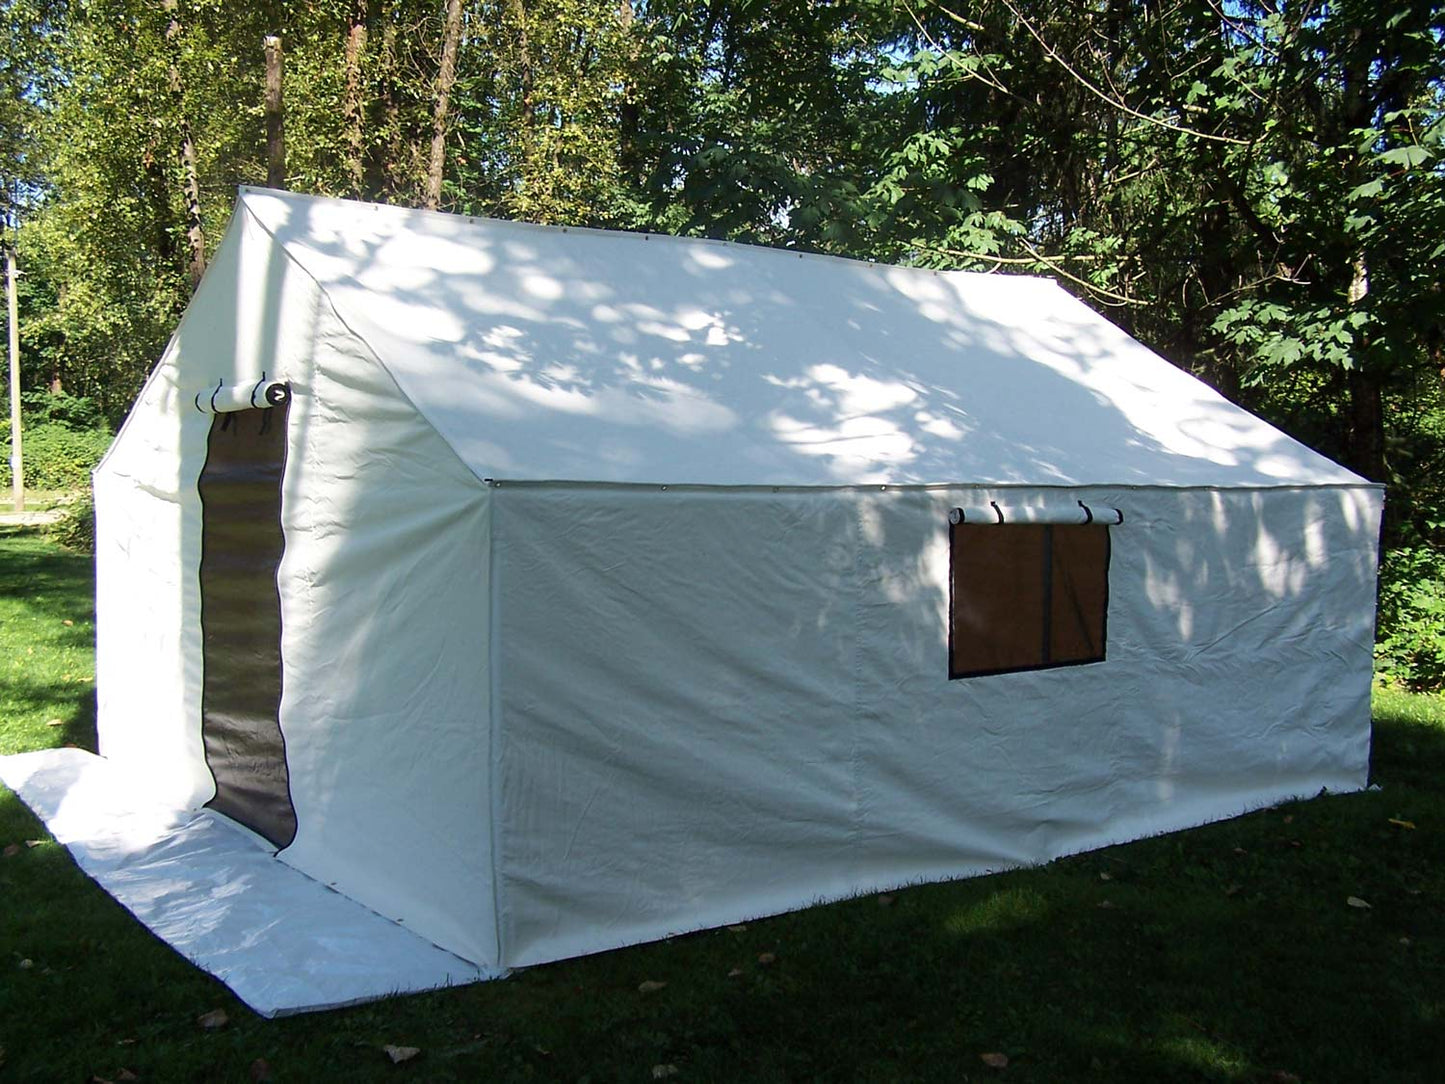 Outfitter Premium Wall Tents